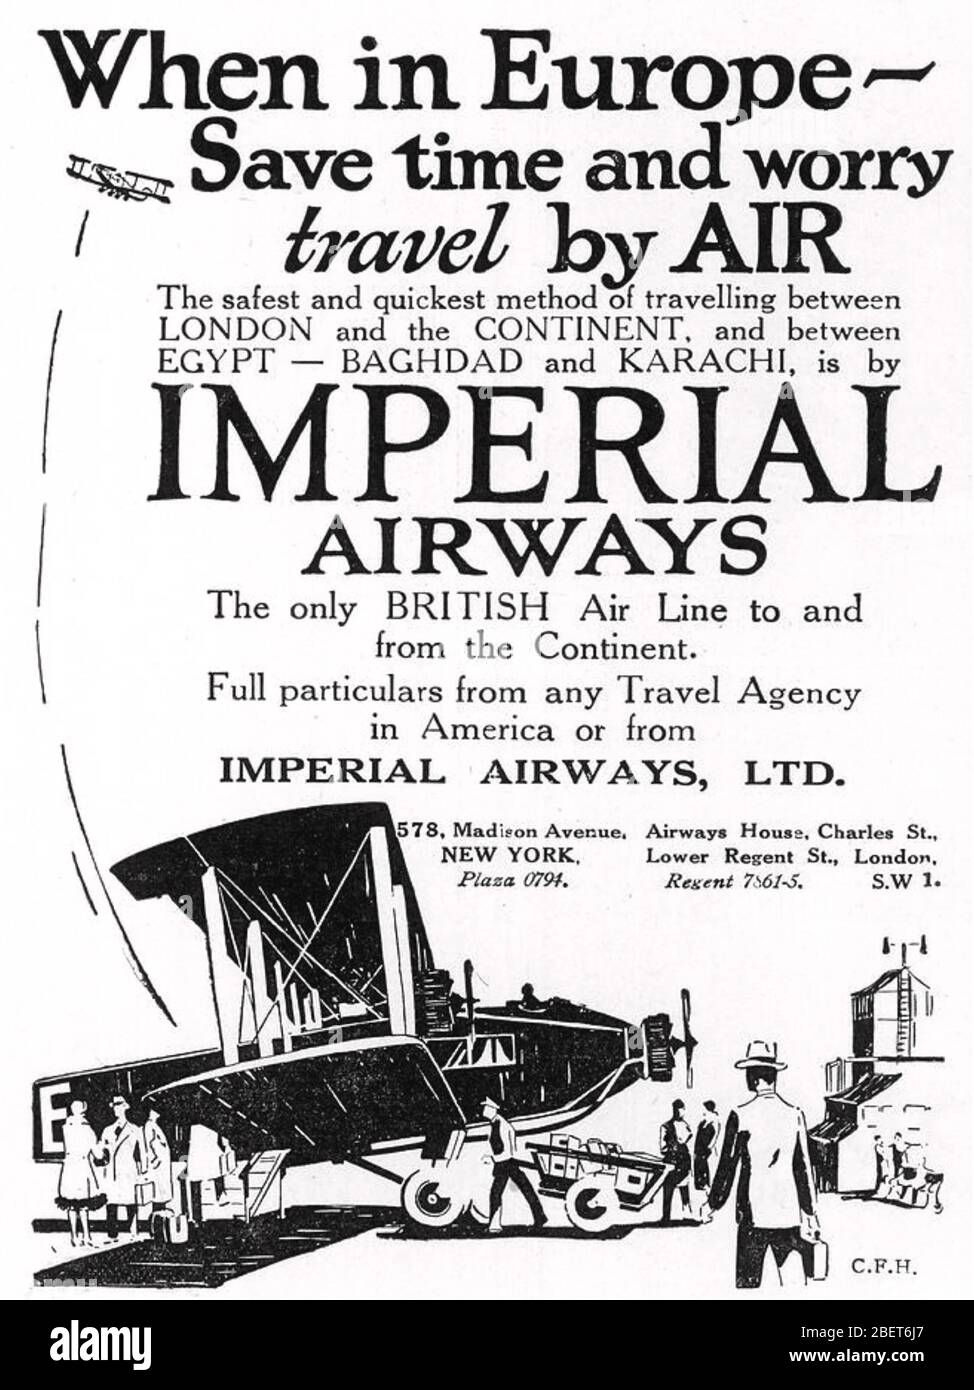 IMPERIAL AIRWAYS advert in an American magazine, about 1934 Stock Photo